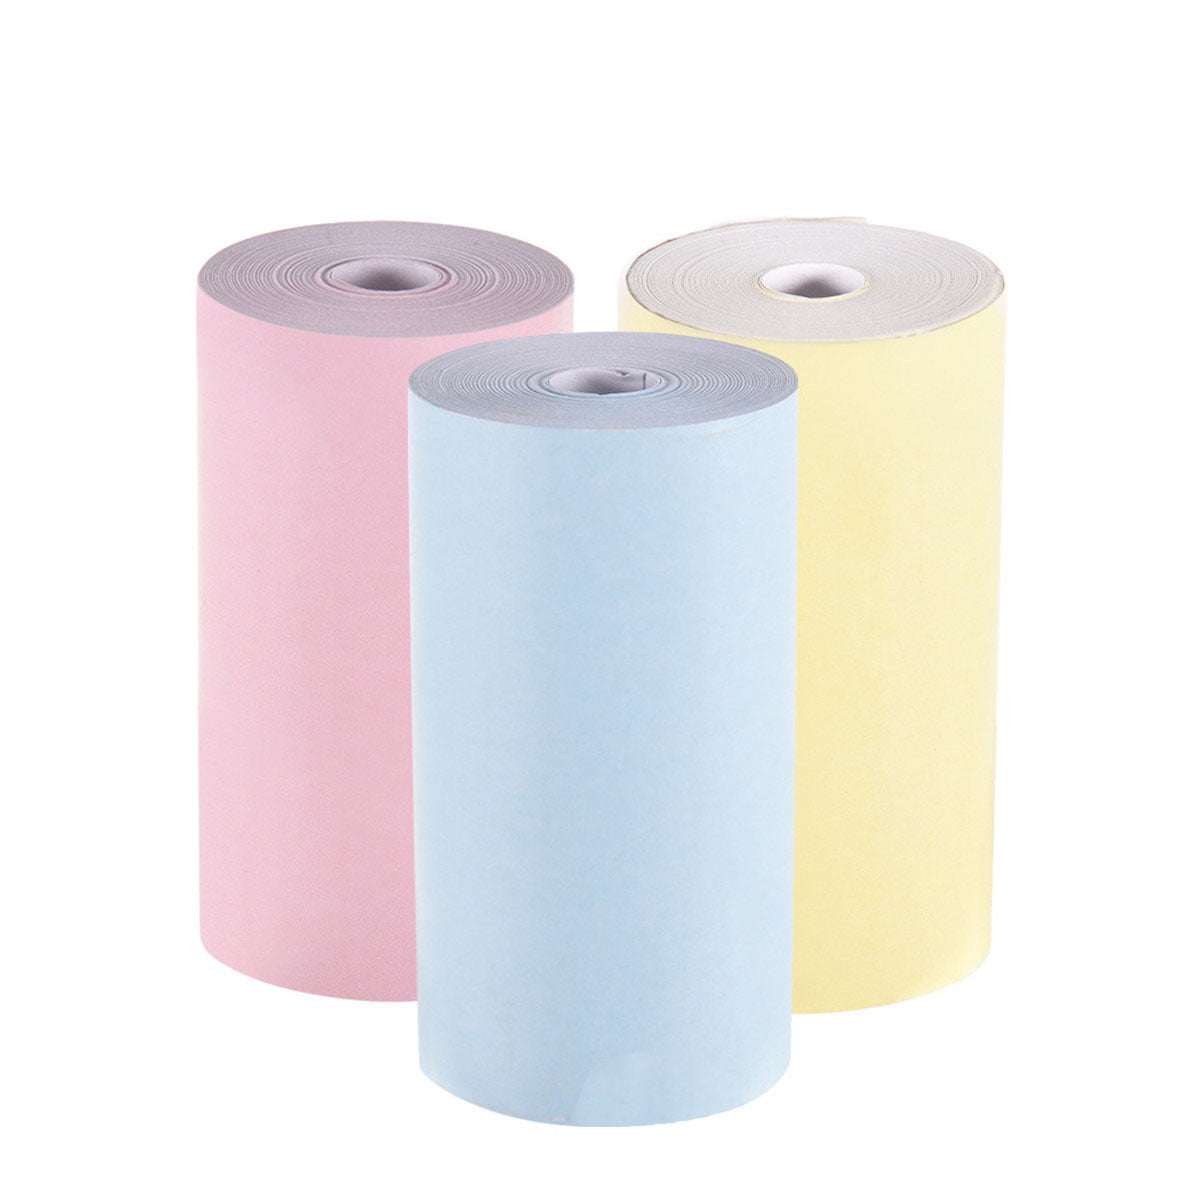 3 Rolls Entweg Colored Printer Paper,Color Thermal Paper Roll 5730mm Bill Receipt Photo Paper Clear Printing for PeriPage A6 Pocket for PAPERANG P1/P2 Mini Photo Printer 2.171.18in 